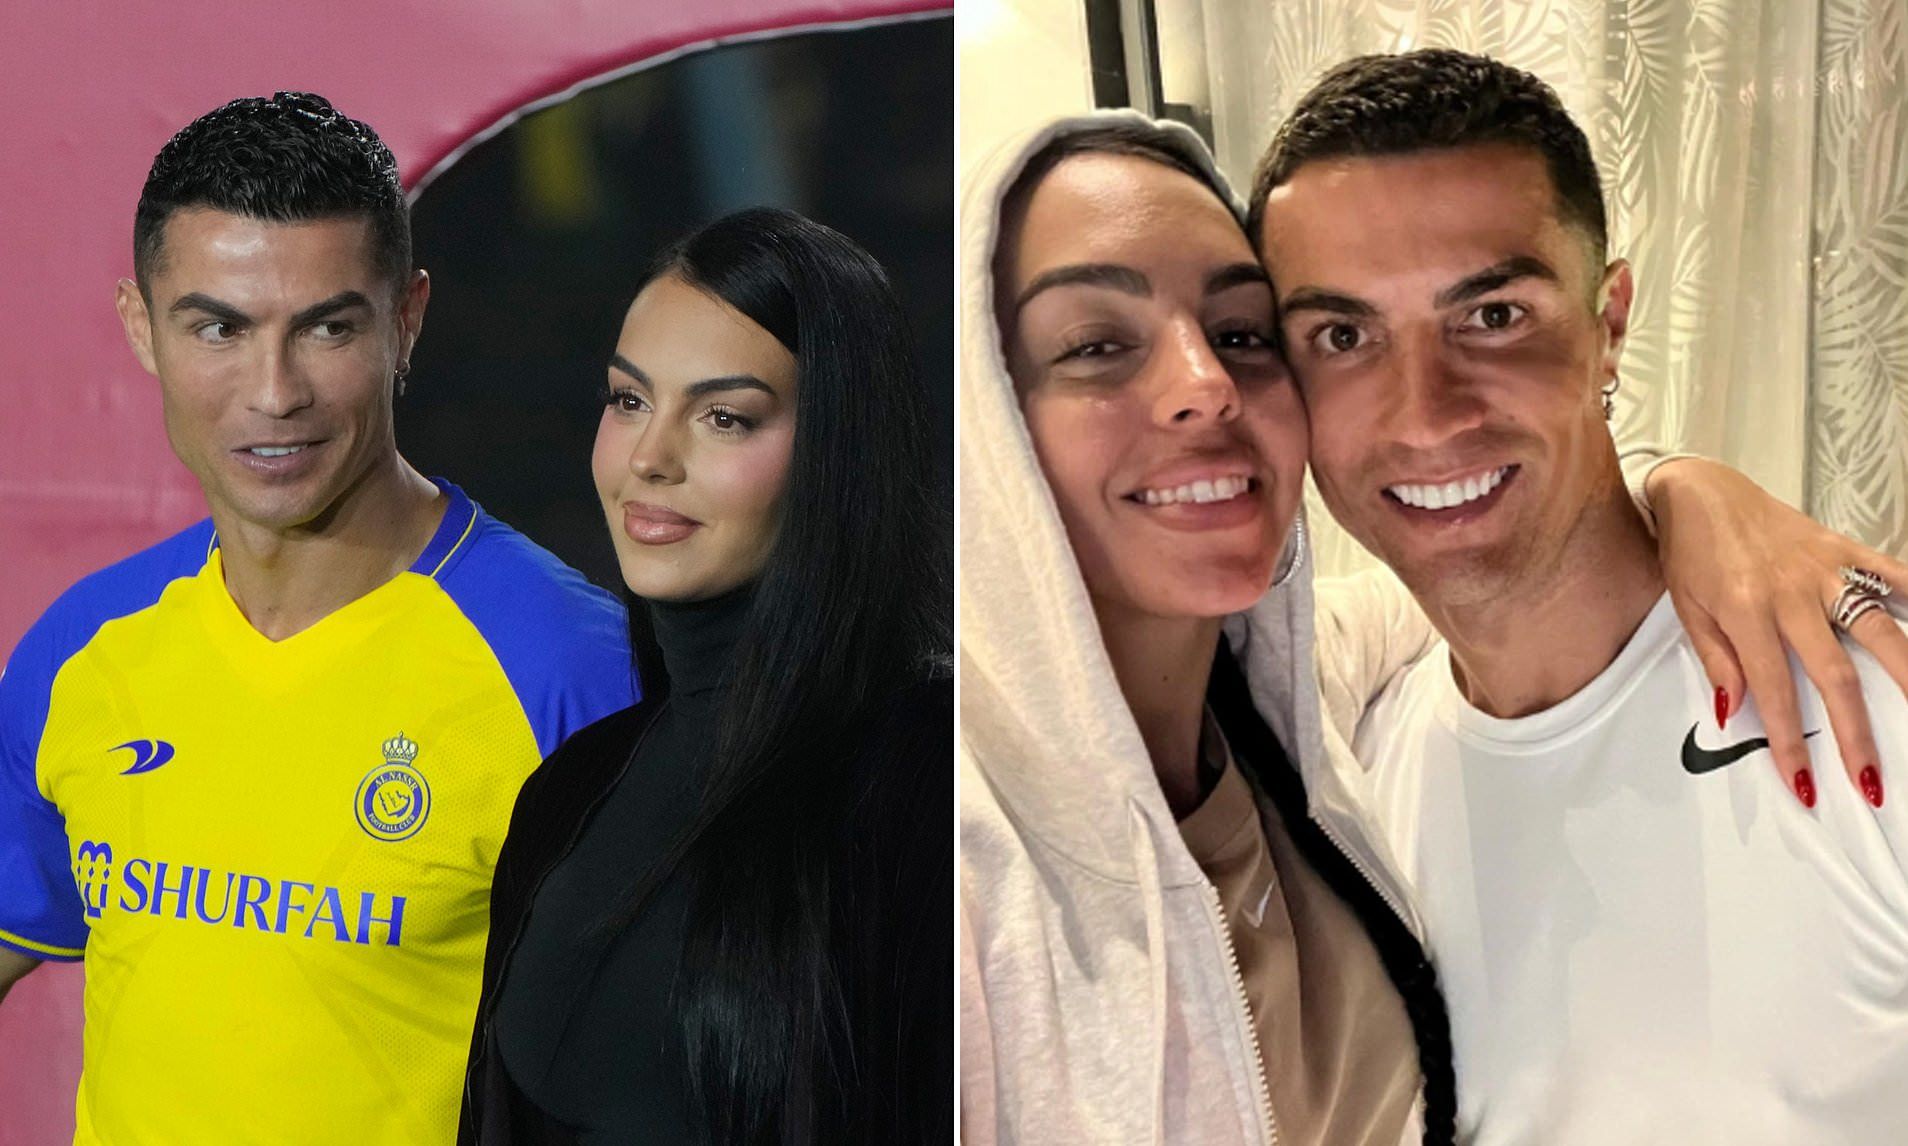 Cristiano Ronaldo to break Saudi law by living together with his partner Georgina Rodriguez